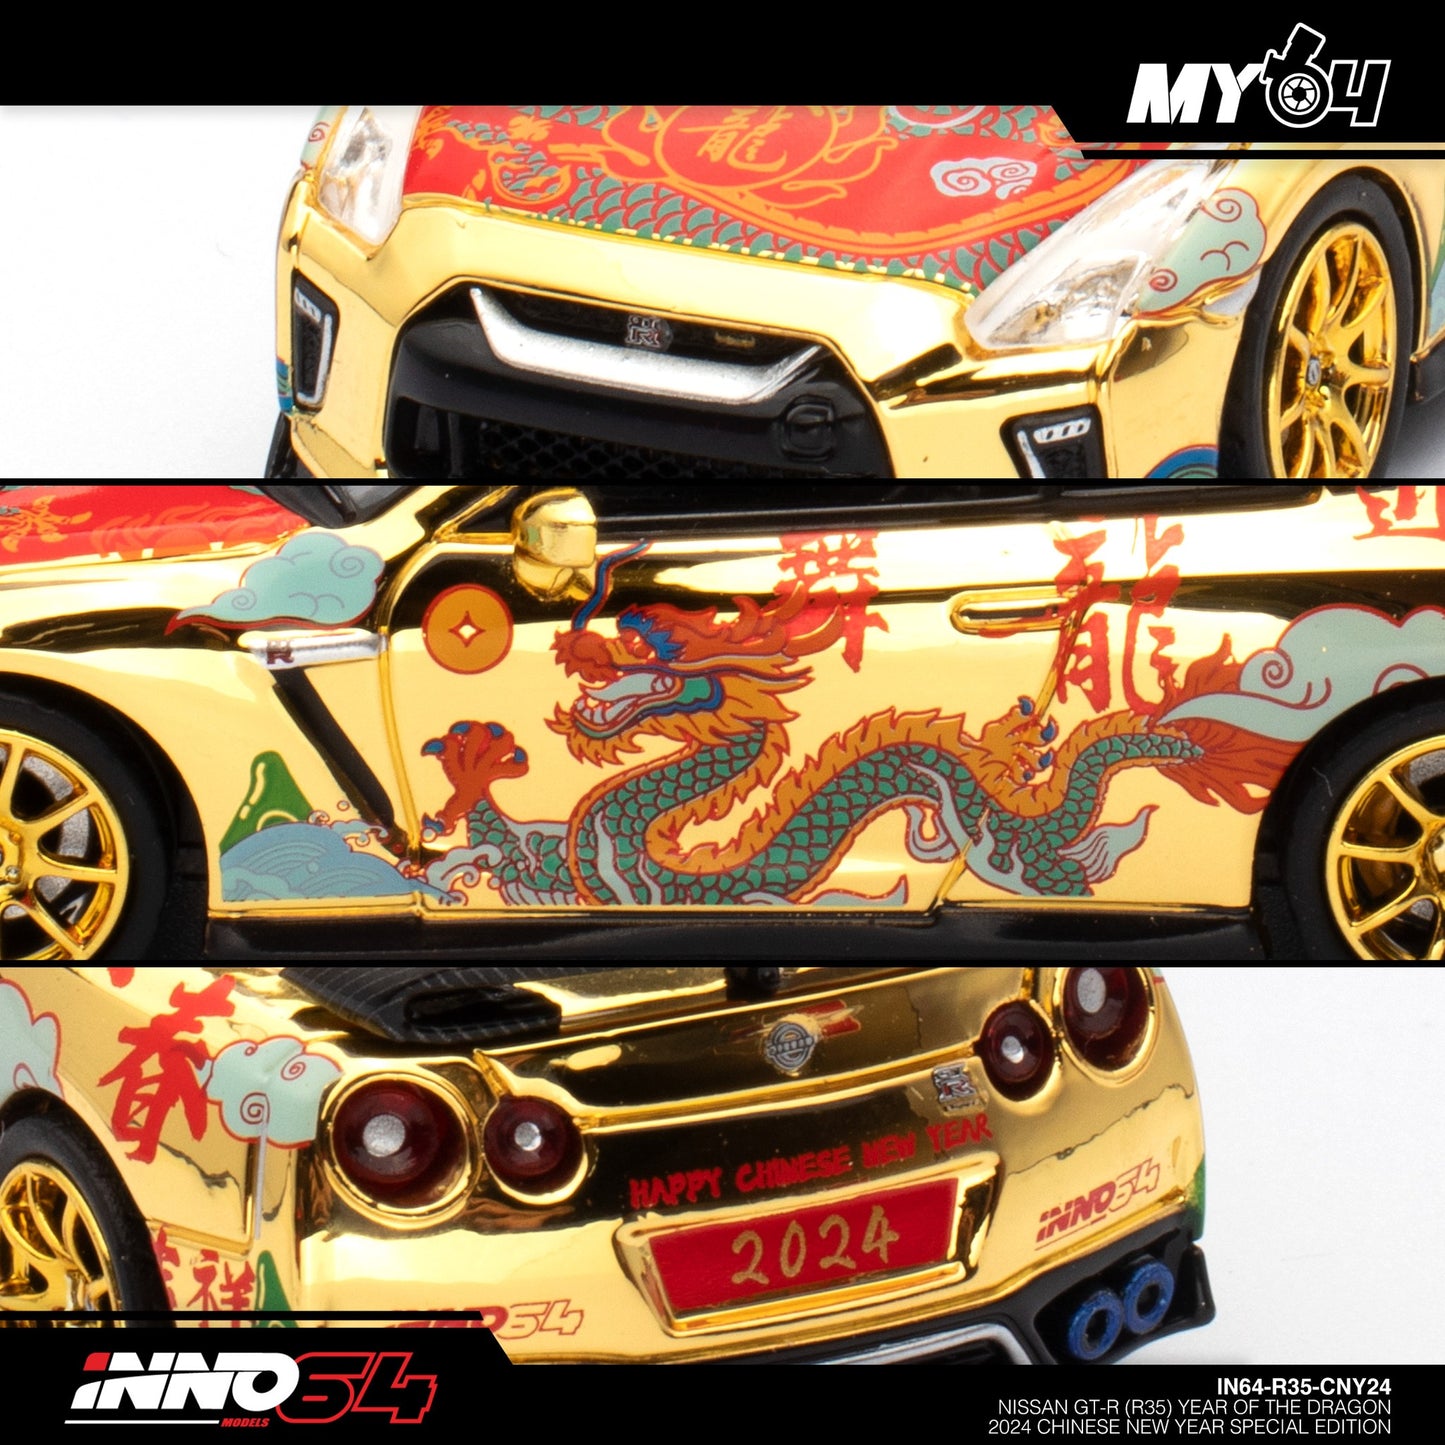 [INNO64] Nissan GT-R (R35) Year Of The Dragon Special Edition 2024 Chinese New Year Edition